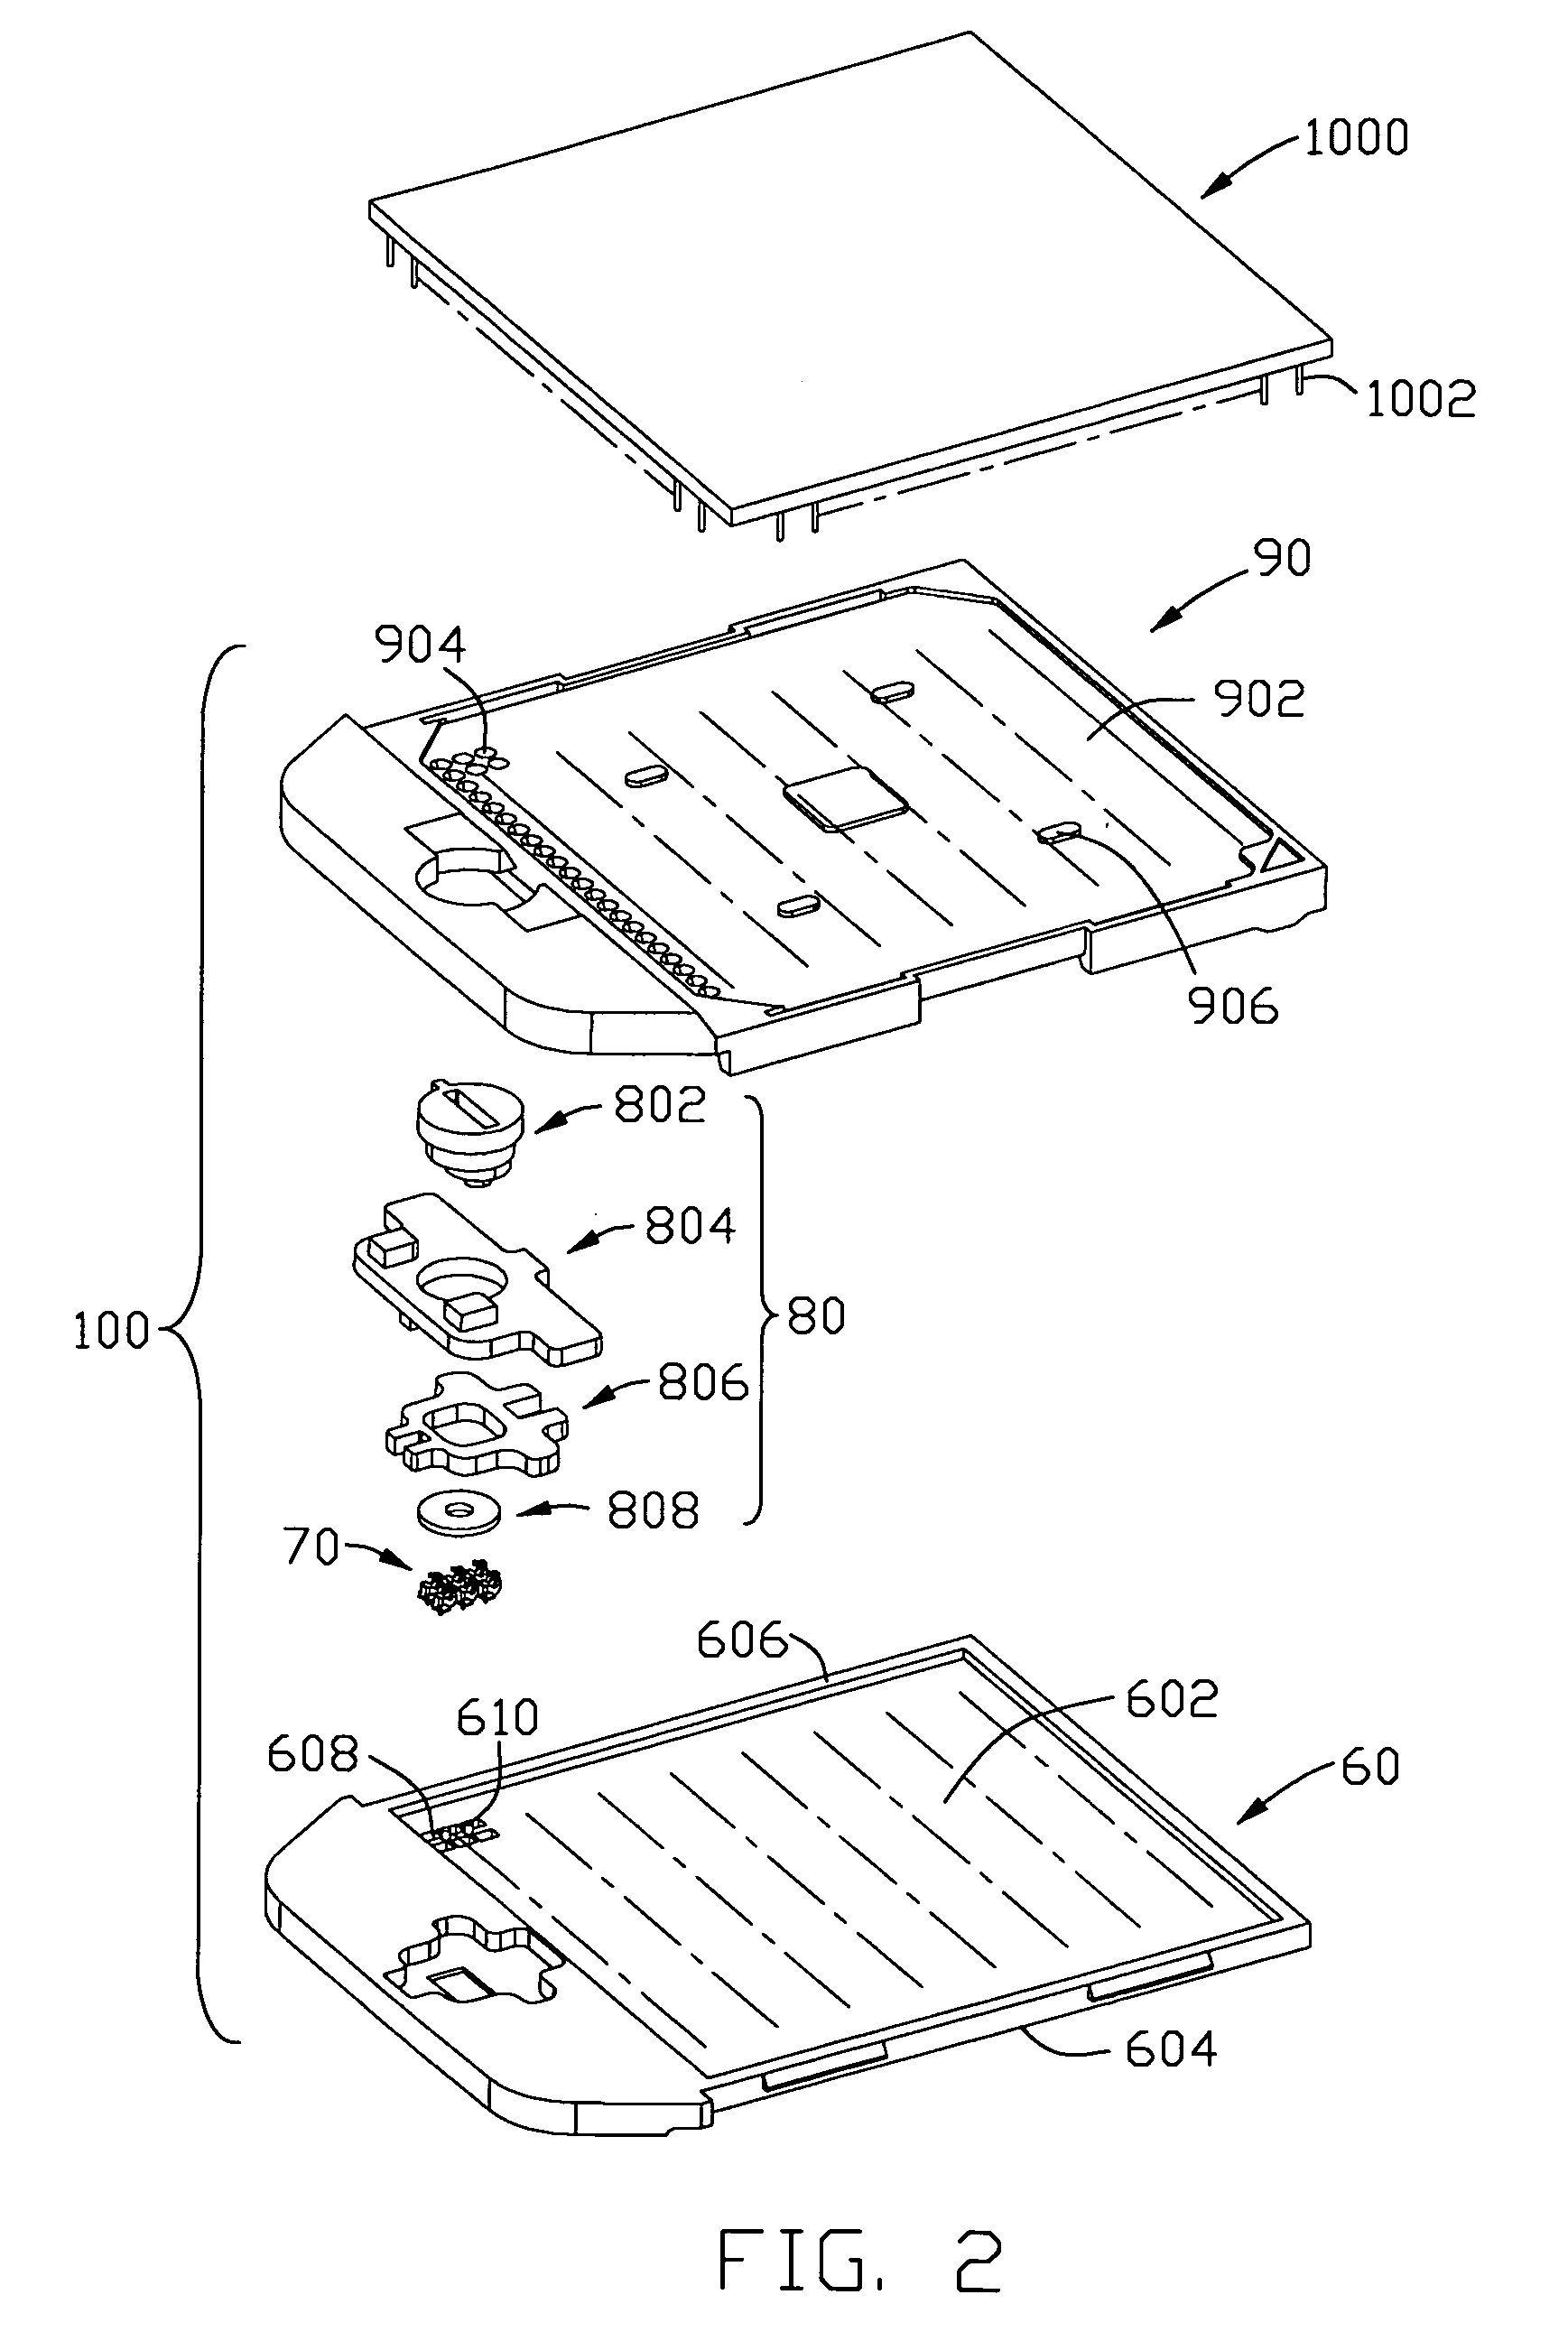 Pin grid array socket having a base with interior standoffs and hightening peripheral walls